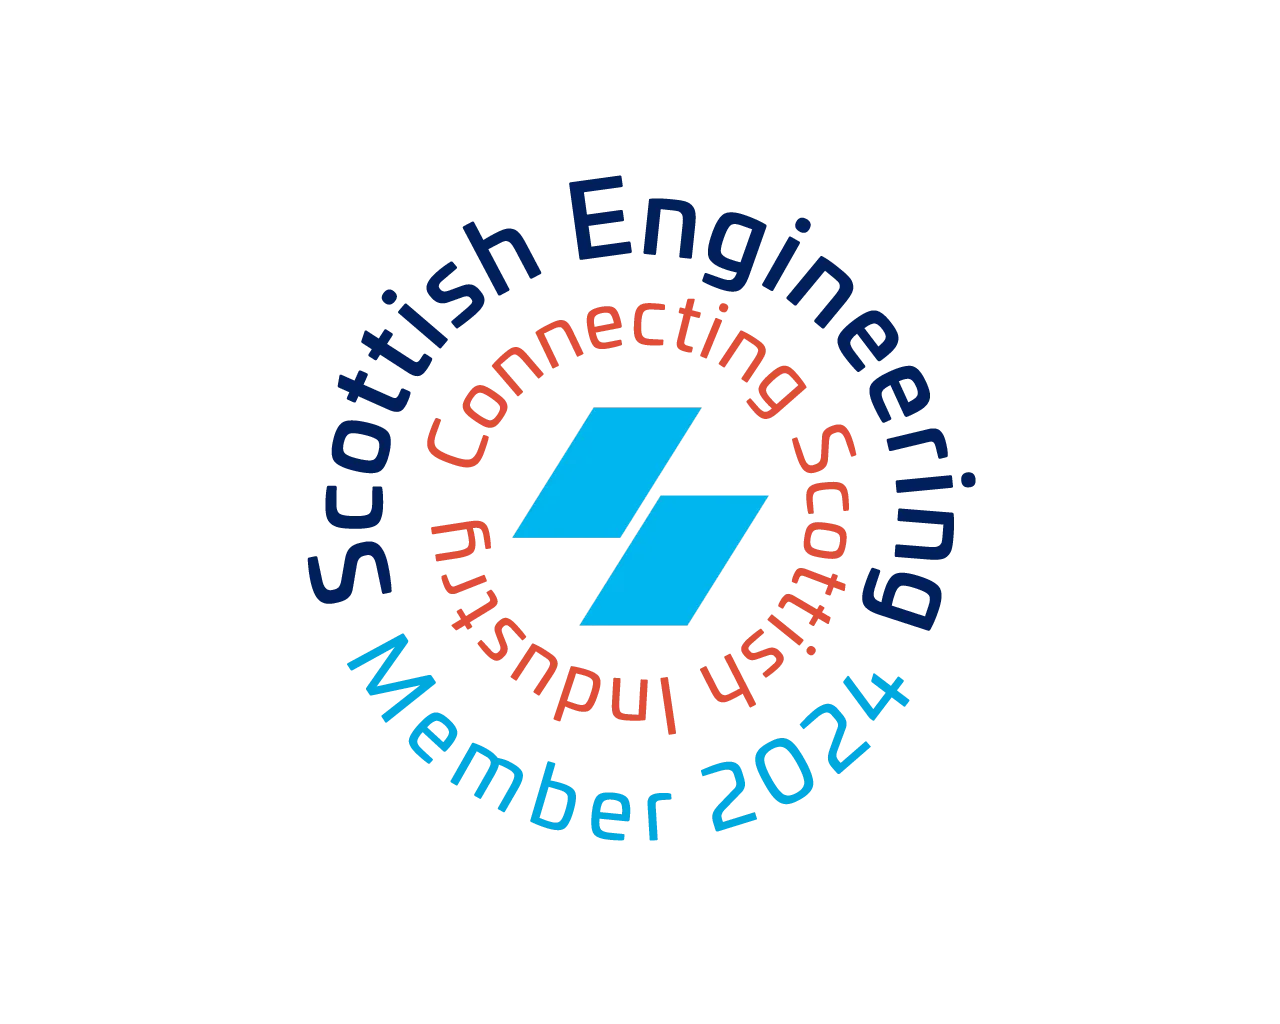 I'm pleased to announce that Steel Plate and Sections has recently been accepted as a member of Scottish Engineering, the senior professional body for engineers in Scotland. This is an important milestone for our company.

As a member, we'll now be part of Scotland's extensive engineering network that represents over 7,500 professionals across the country. We look forward to making connections with other members - exchanging insights, collaborating, and learning from one another.

We also plan to take full advantage of the many benefits Scottish Engineering membership provides.

We are delighted about the new learning, relationships, and prestige membership that Scottish Engineering brings. It's a great fit for our innovative, quality-driven approach as we continue growing our business.

We look forward to updating you all on how we're leveraging these new member benefits in the future.

Lily Rayson
Commercial Co-ordinator SPS
